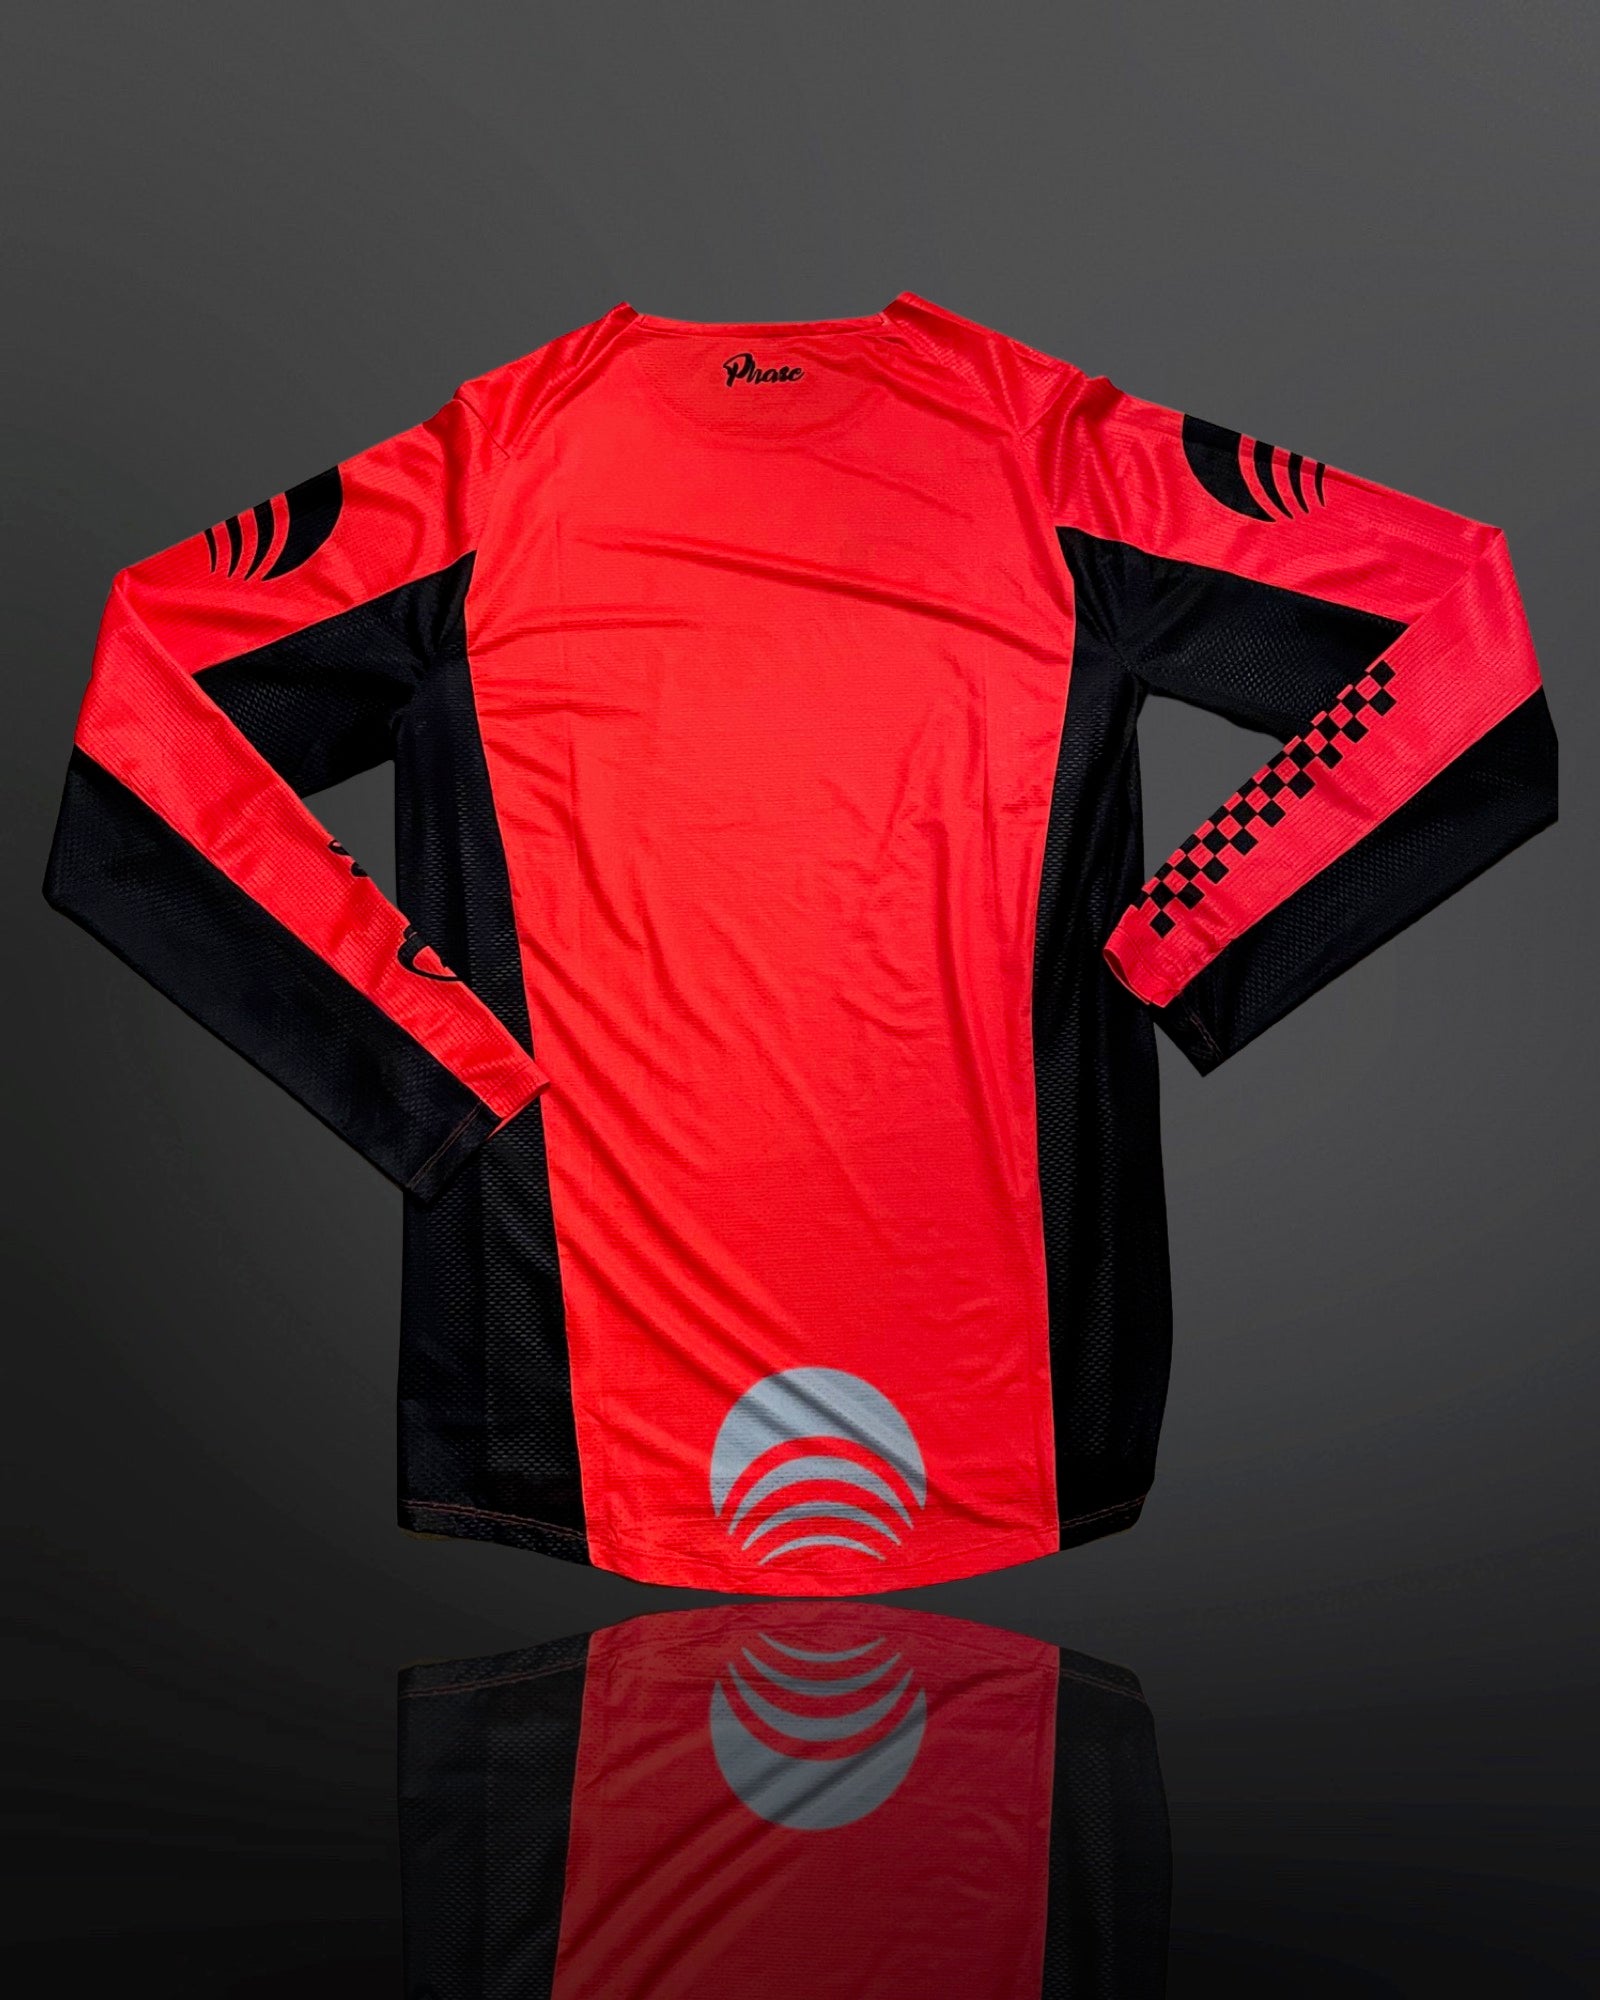 SPECTRUM CHECKERS JERSEY w/VDT -- RED/BLACK